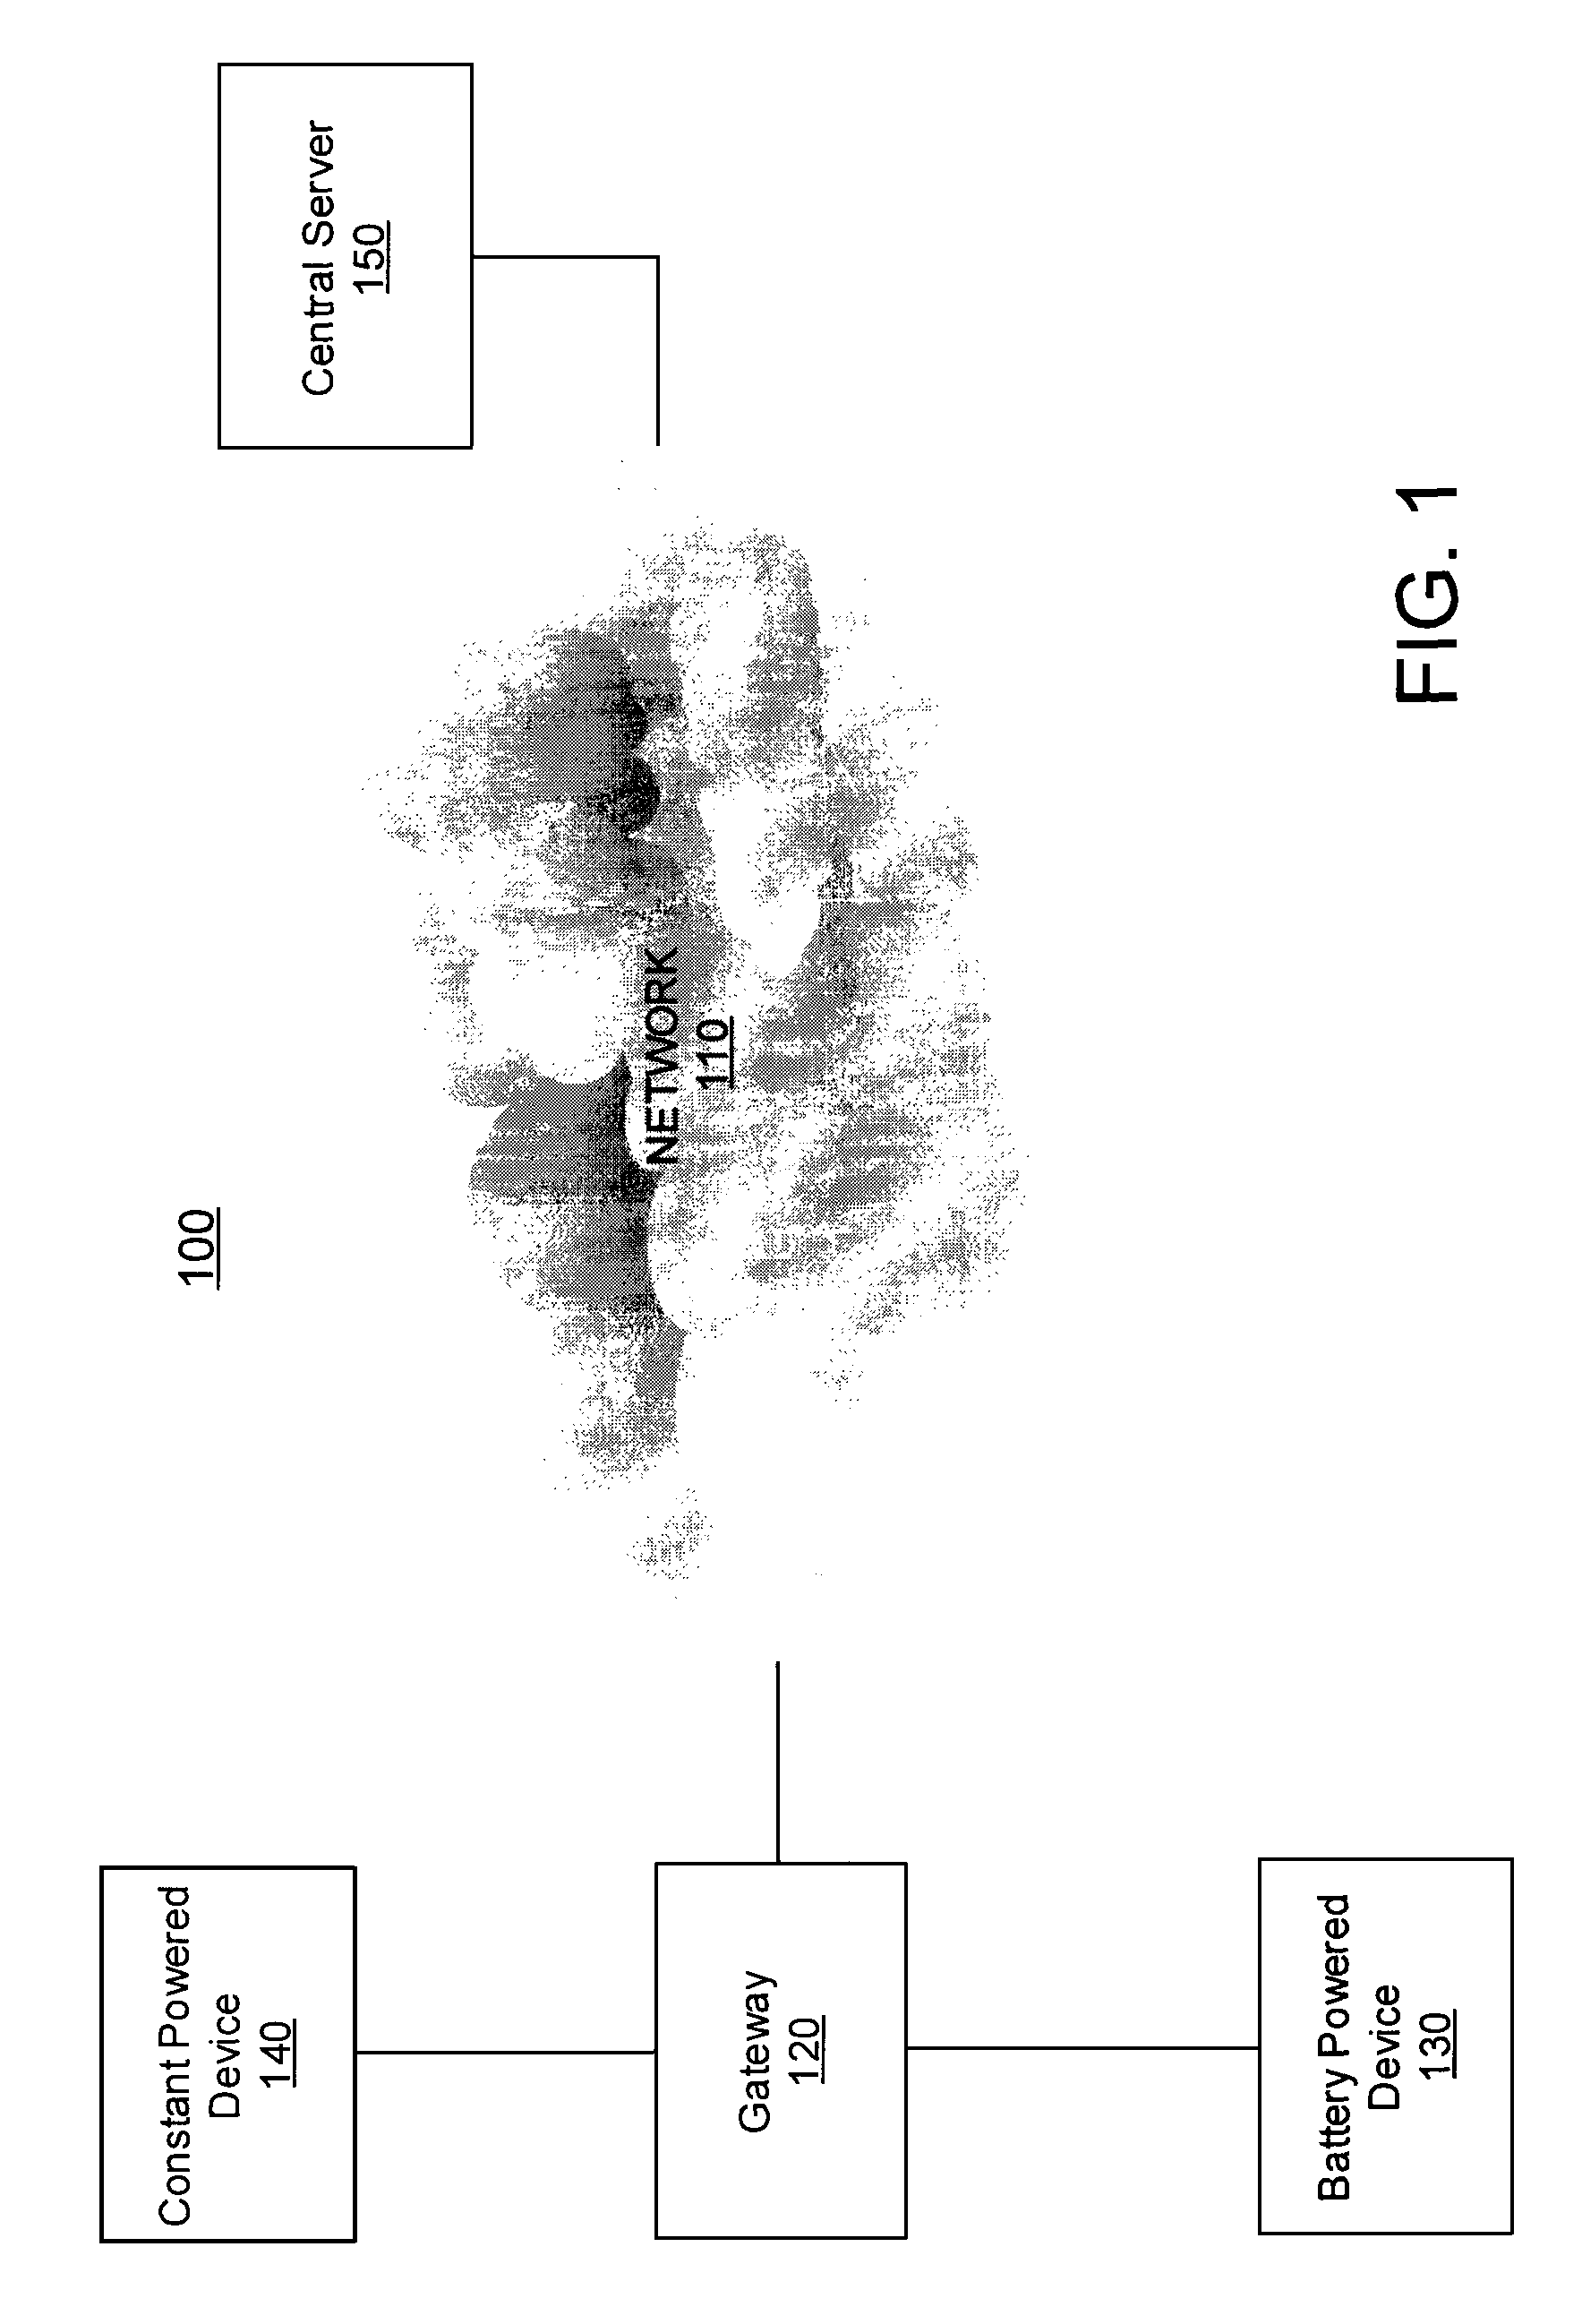 Method and system for providing a network protocol for utility services